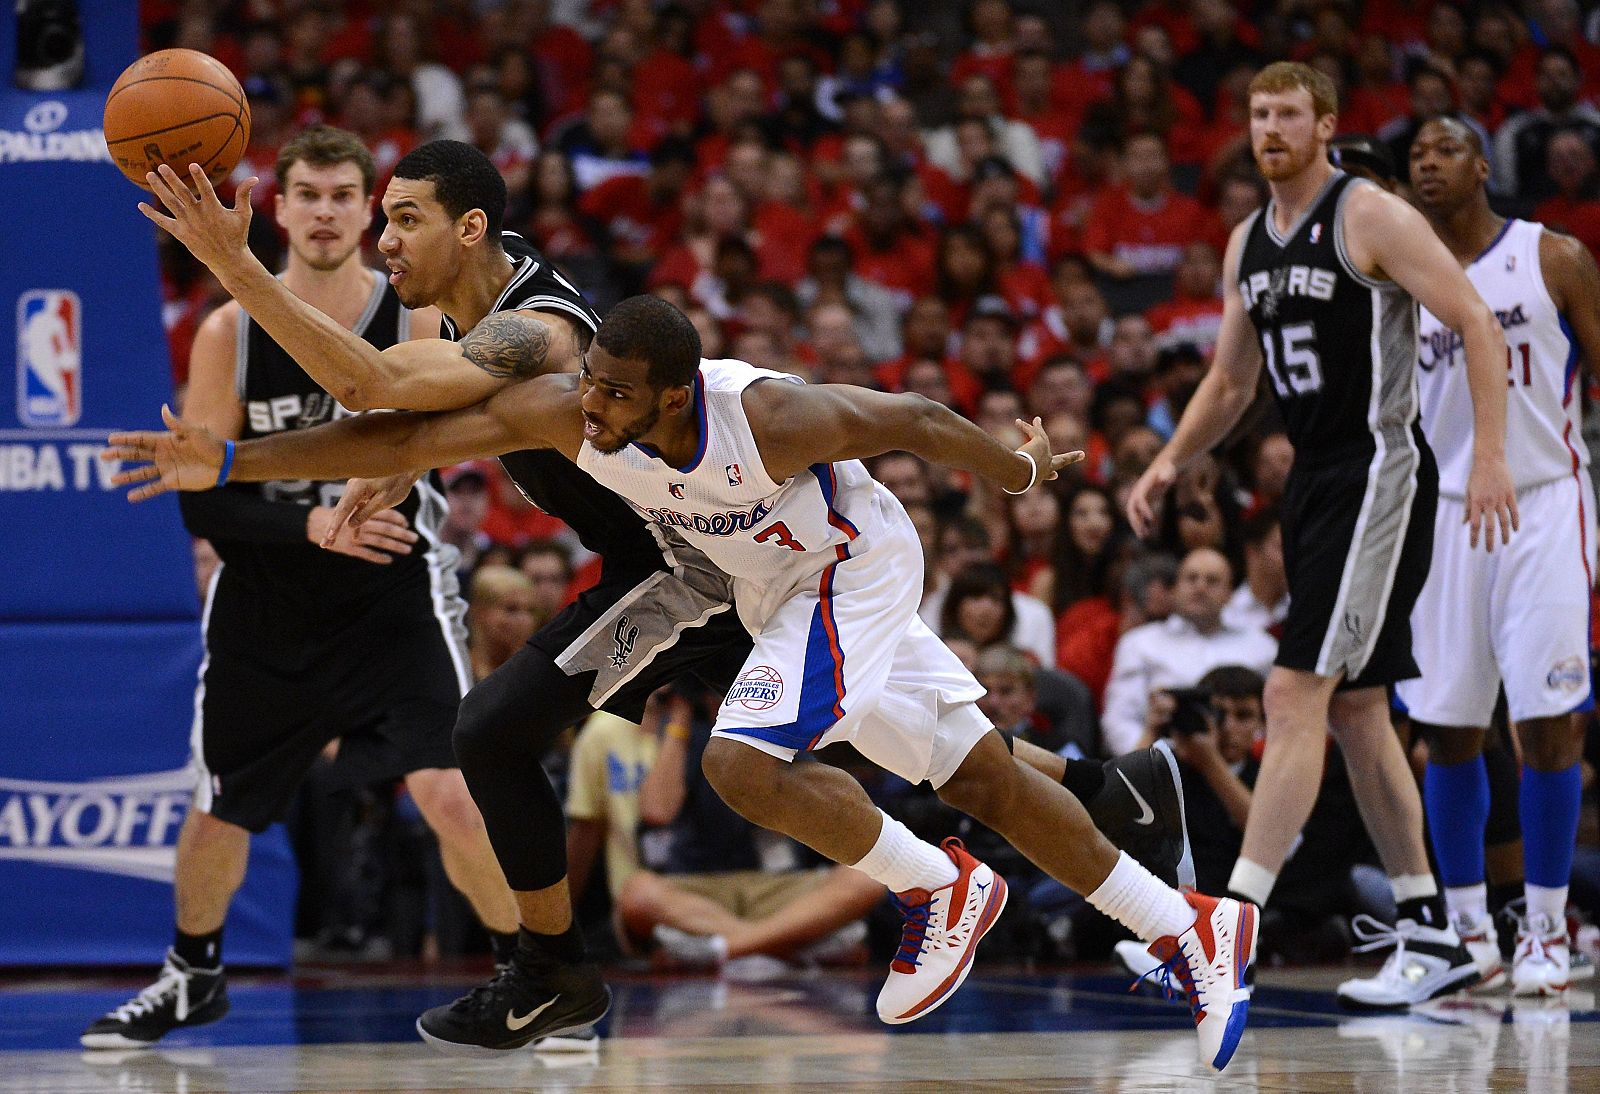 San Antonio Spurs v Los Angeles Clippers - Game Four